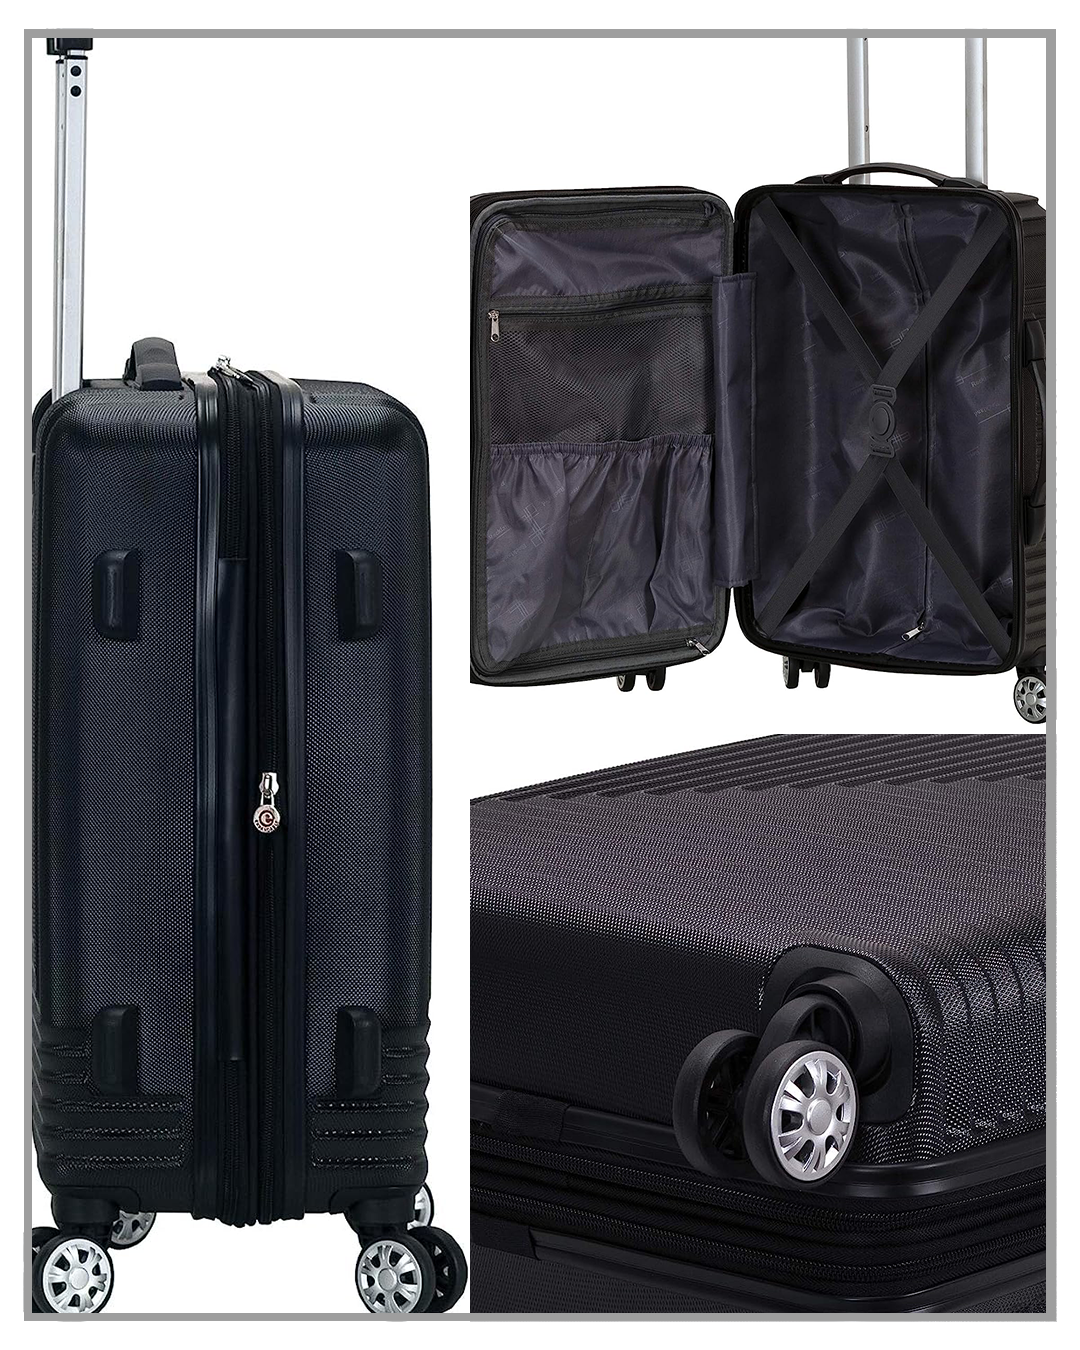 Black Rockland X Truth Black Limited Collaboration Star Trail Hardside Spinner Wheel Luggage Carry-On 20-Inch